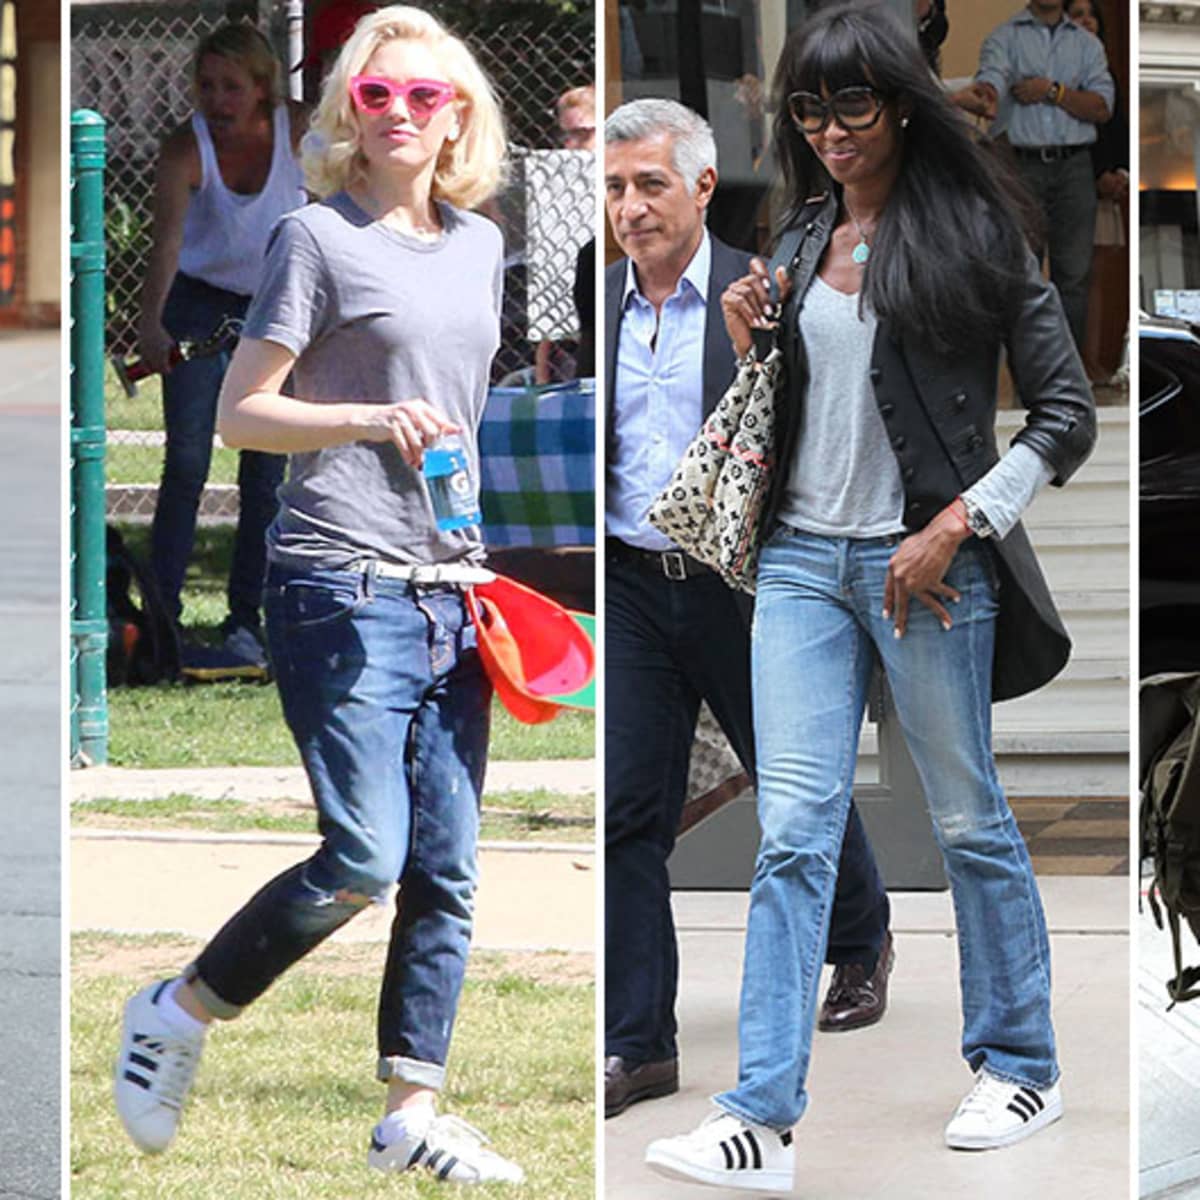 See The New 'It' Sneakers Your Fave Fashion Stars Have Been Sporting